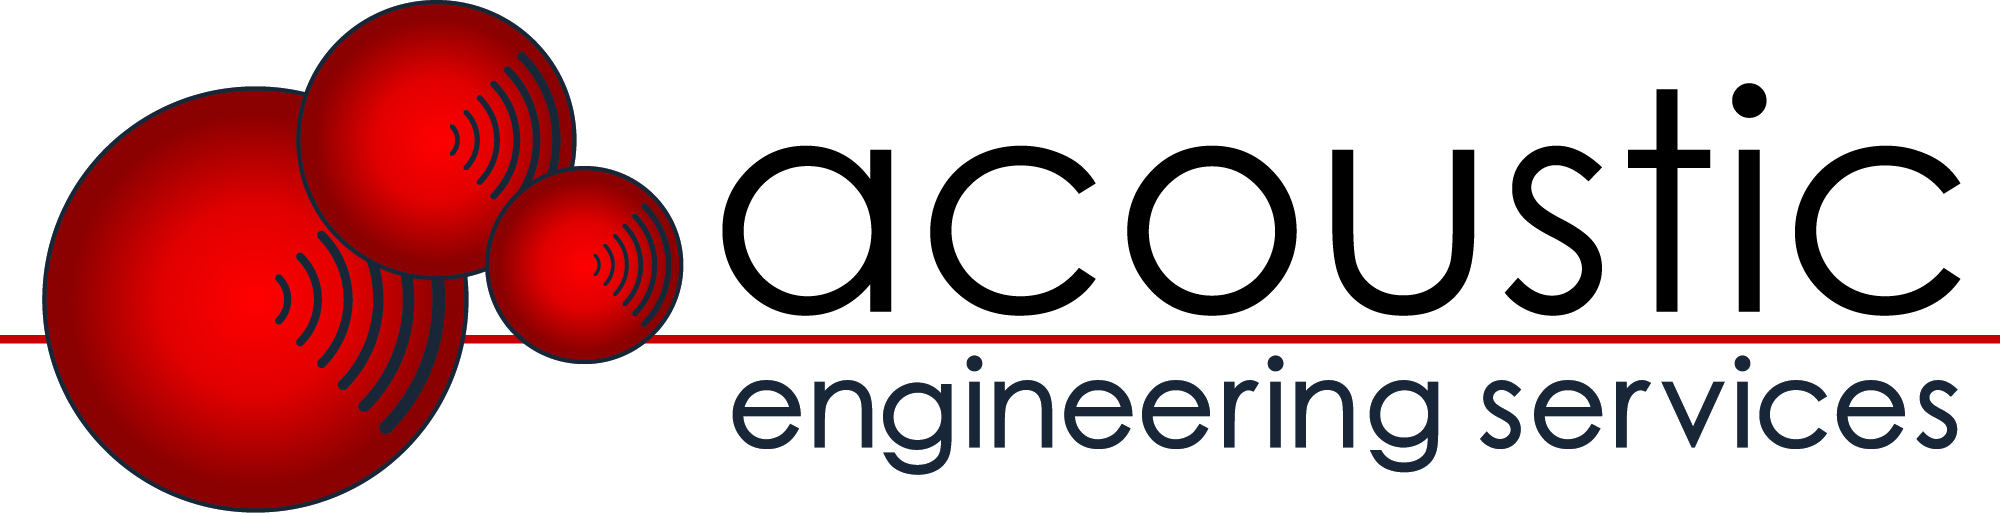 Acoustic Engineering Services Ltd